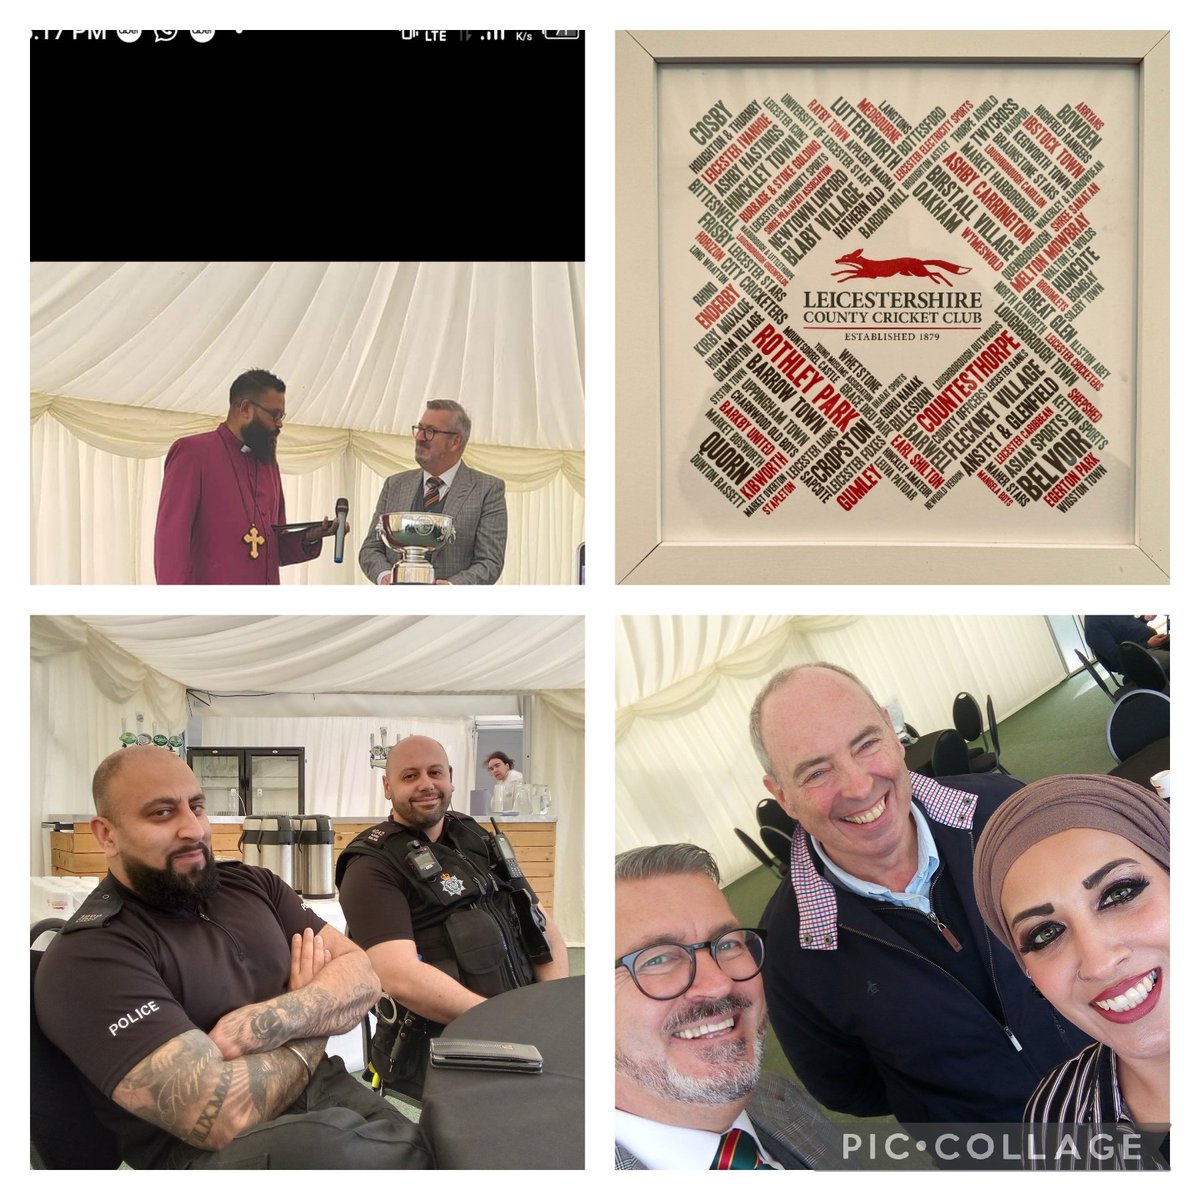 @WesleyHallCC delighted to be part of multifaith blessing for Leicestershire County Cricket Club. (vs Sussex). Contributions from #Bahai #Buddhist #Christian #Hindu #Jain #Jewish #Muslim #Pagan #Sikh speakers, MCed by Bishop of Loughborough @BishopSaju.@leicspolice @GMBallentyne